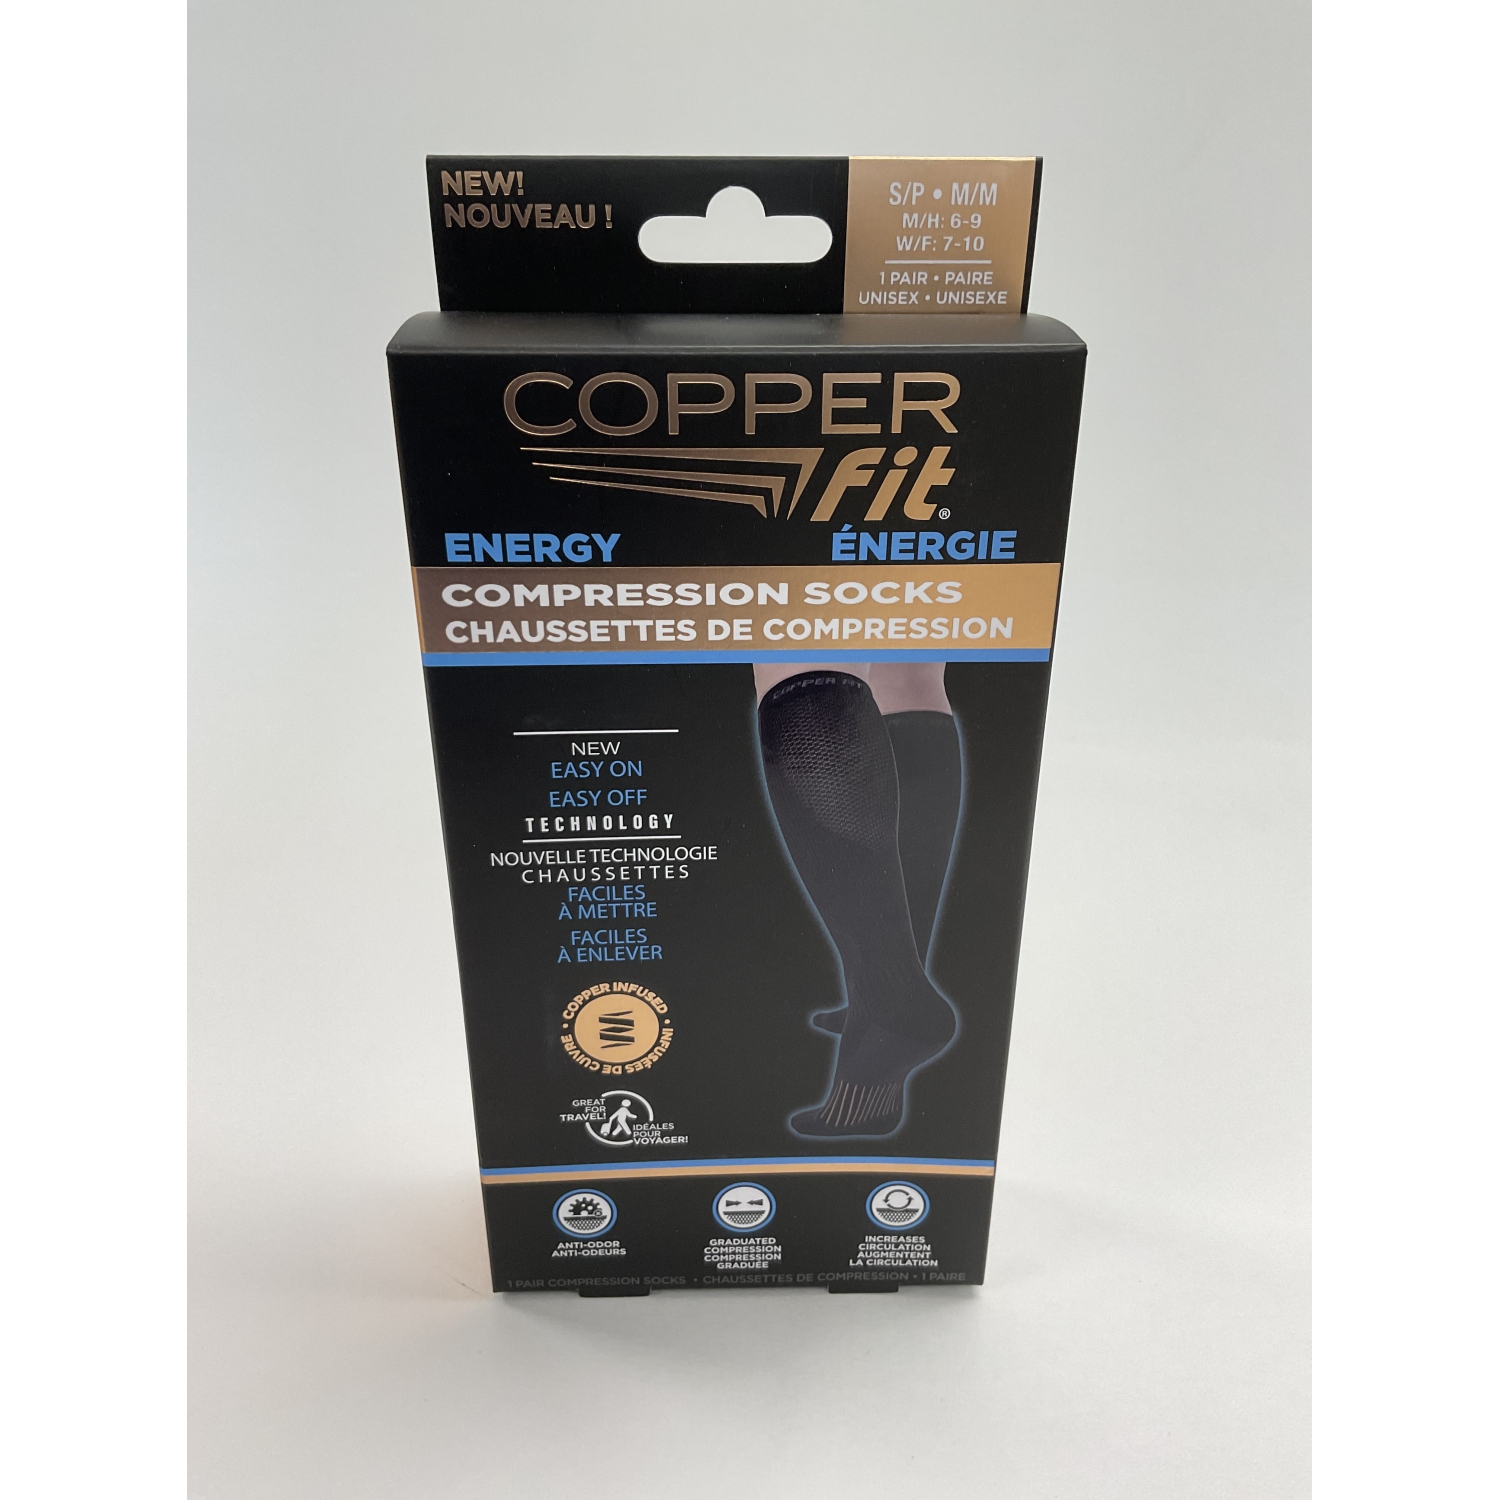 Copper Infused Anti-Fatigue Compression Socks – Trophy Trout Lures and Fly  Fishing